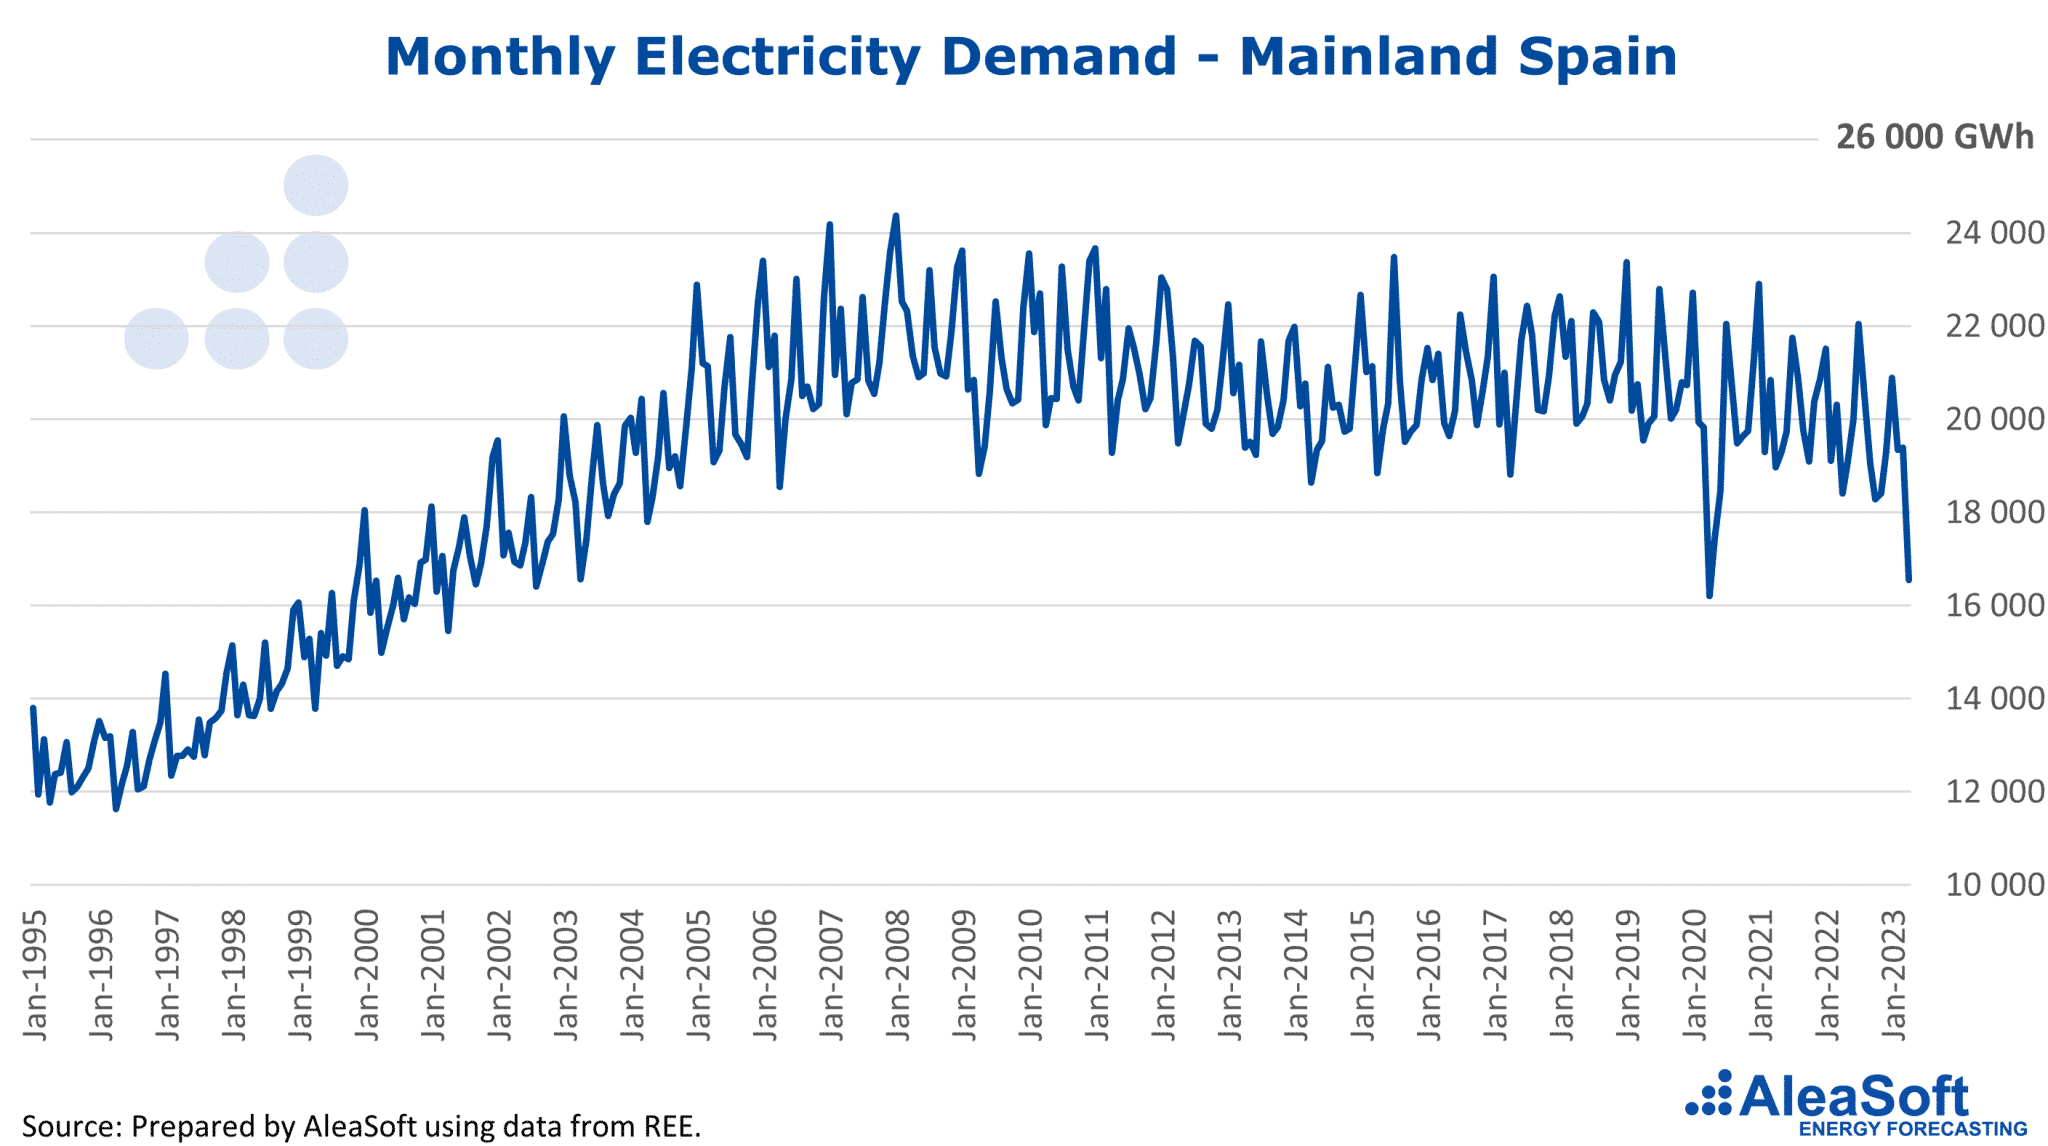 AleaSoft - Monthly electricity demand Spain